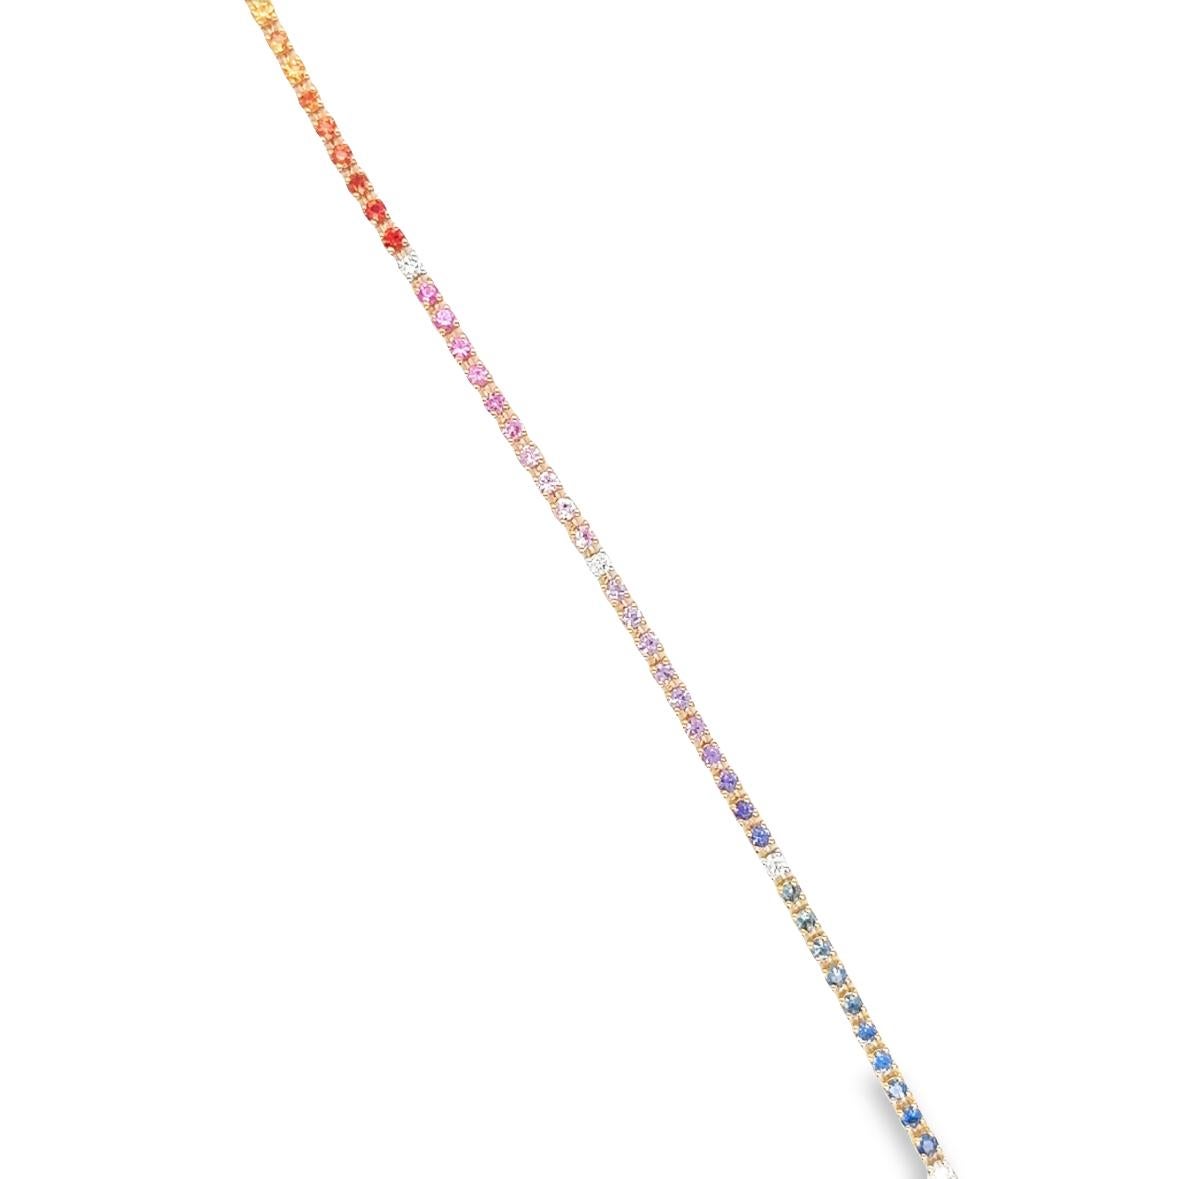 The RIAD Tennis Bracelet is elegantly designed in 18Kt rose gold, with a weight of 7.74 grams. It features a stunning combination of Colored Sapphires, totaling 2.13 carats, and is adorned with Diamonds of G color and VS clarity, amounting to 0.16